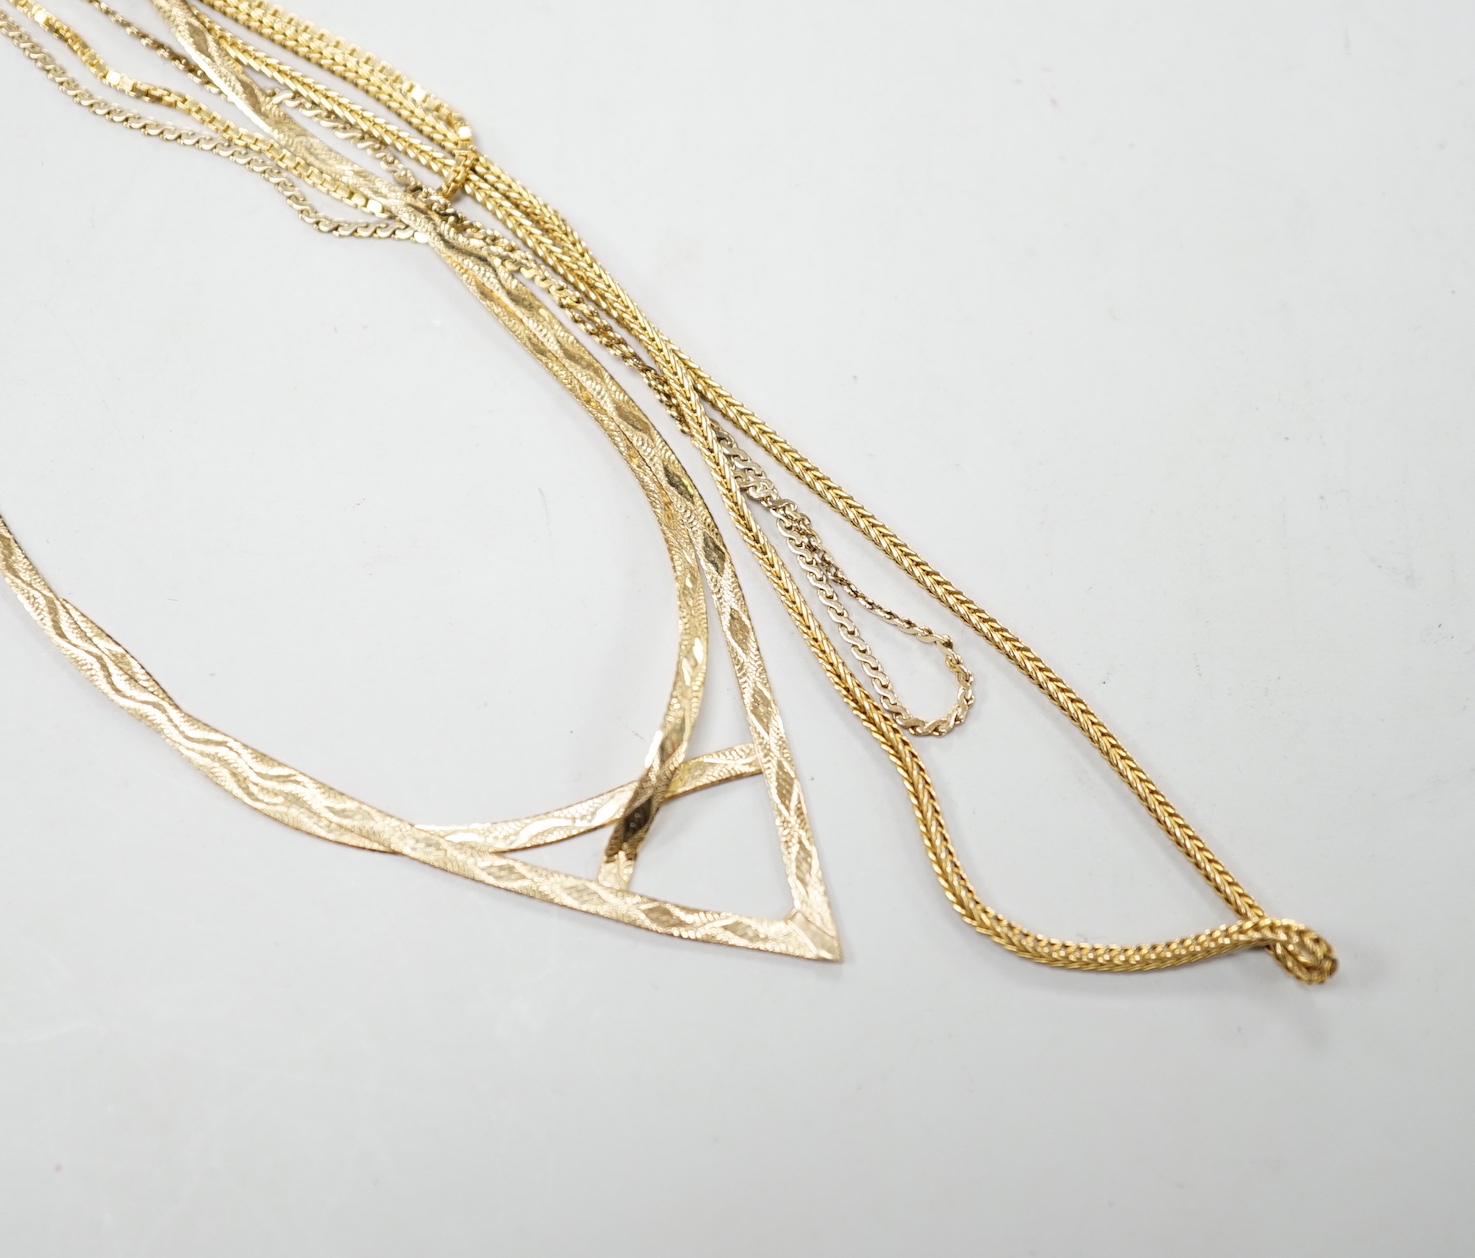 Two modern 9ct gold chains, longest 50cm, 6.3 grams, a 14k chain, 46cm, 2.6 grams and a 750 yellow metal chain, 38cm, 3.5 grams.